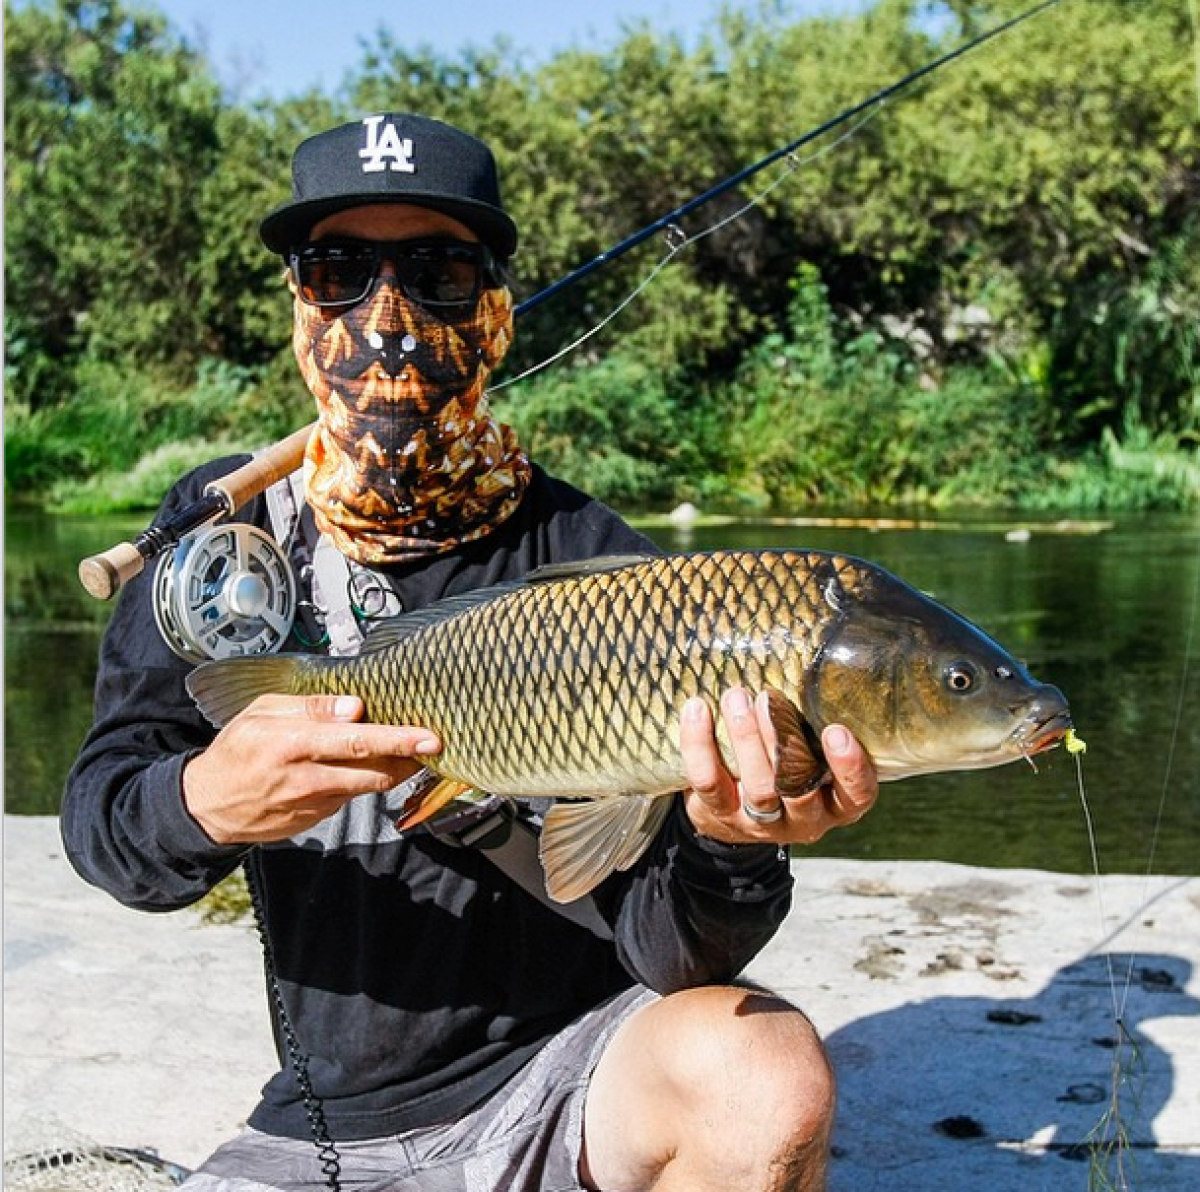 Matus Sobolic, 29, of Altadena caught a Carp during the "Off the Hook" fishing derby on the Los Angeles River.